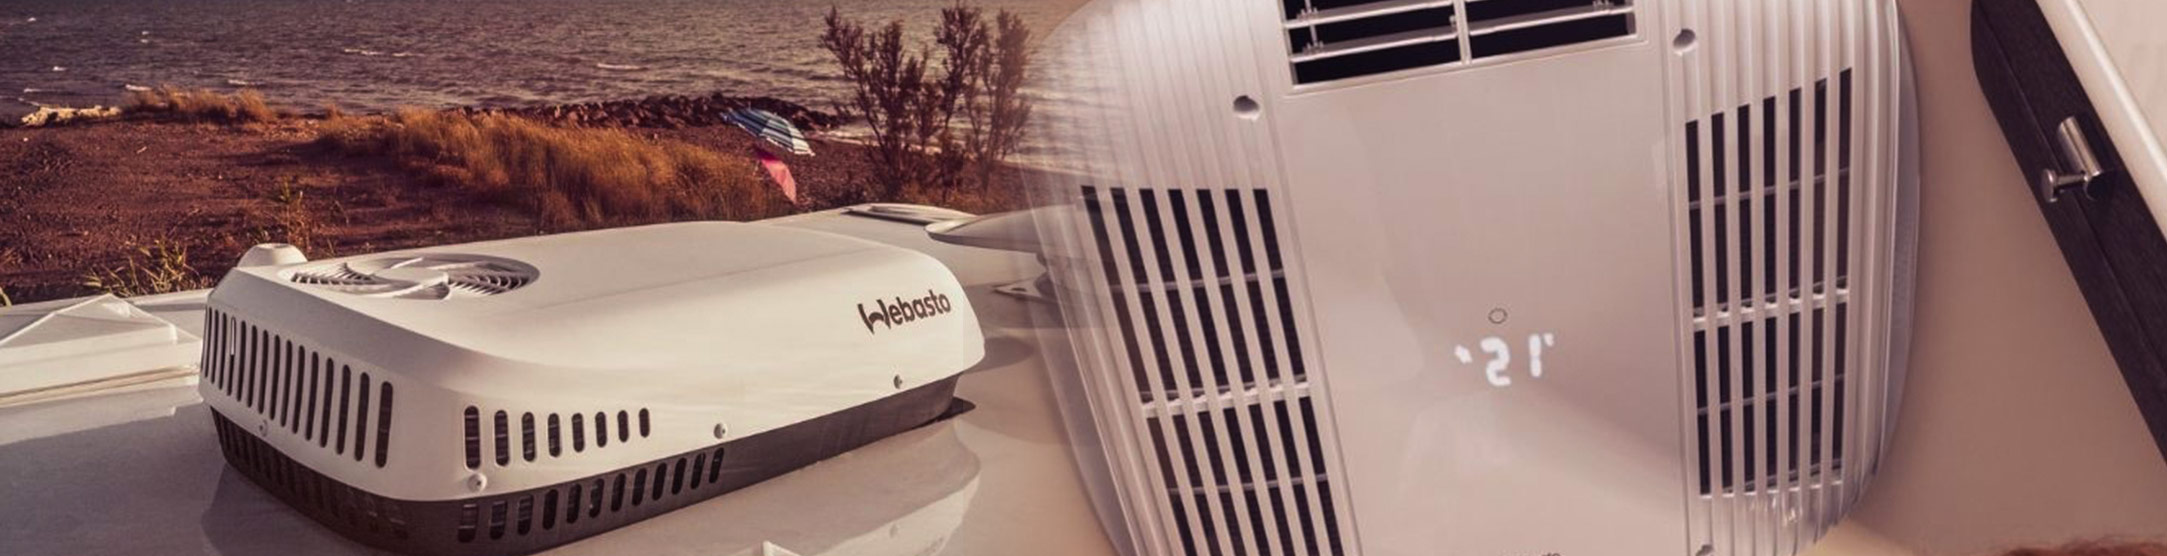 Cool your RV down quickly with a Webasto air conditioner